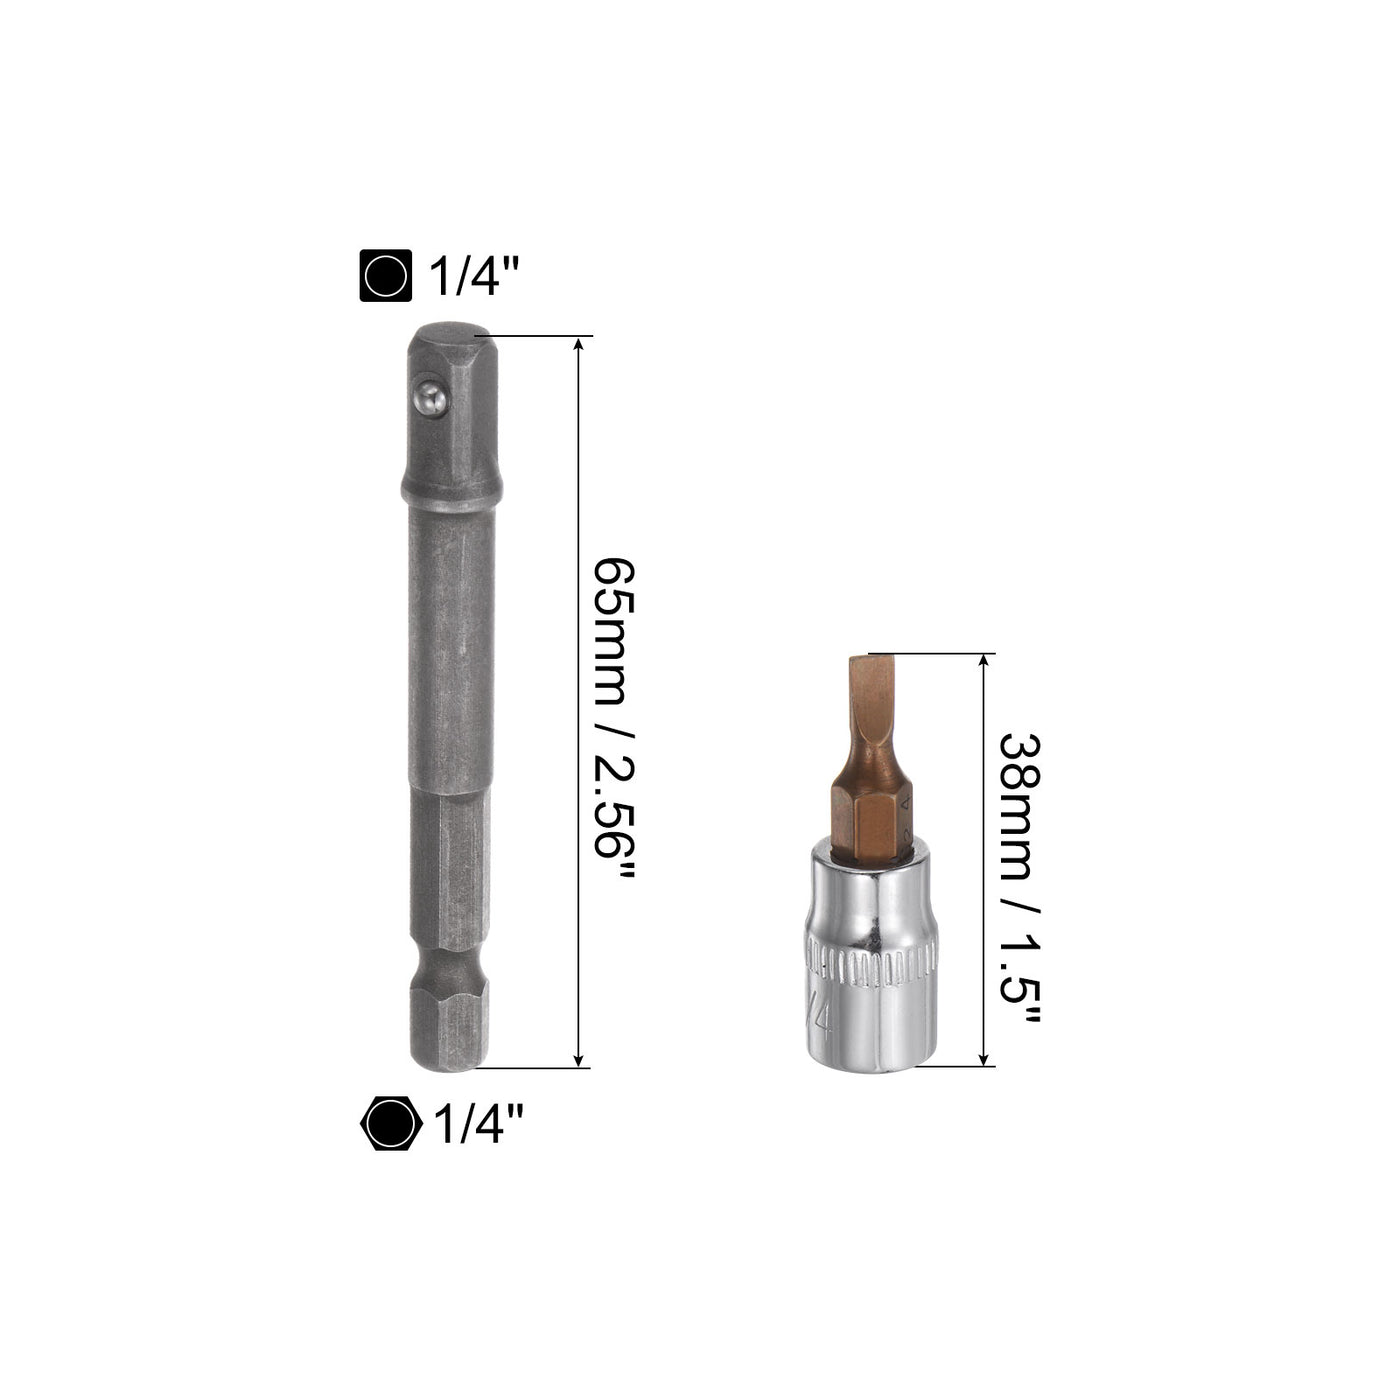 uxcell Uxcell FD4 Slotted Bit Socket, 1/4" Drive 1.5" Length W Hex Shank Power Drill Adapter